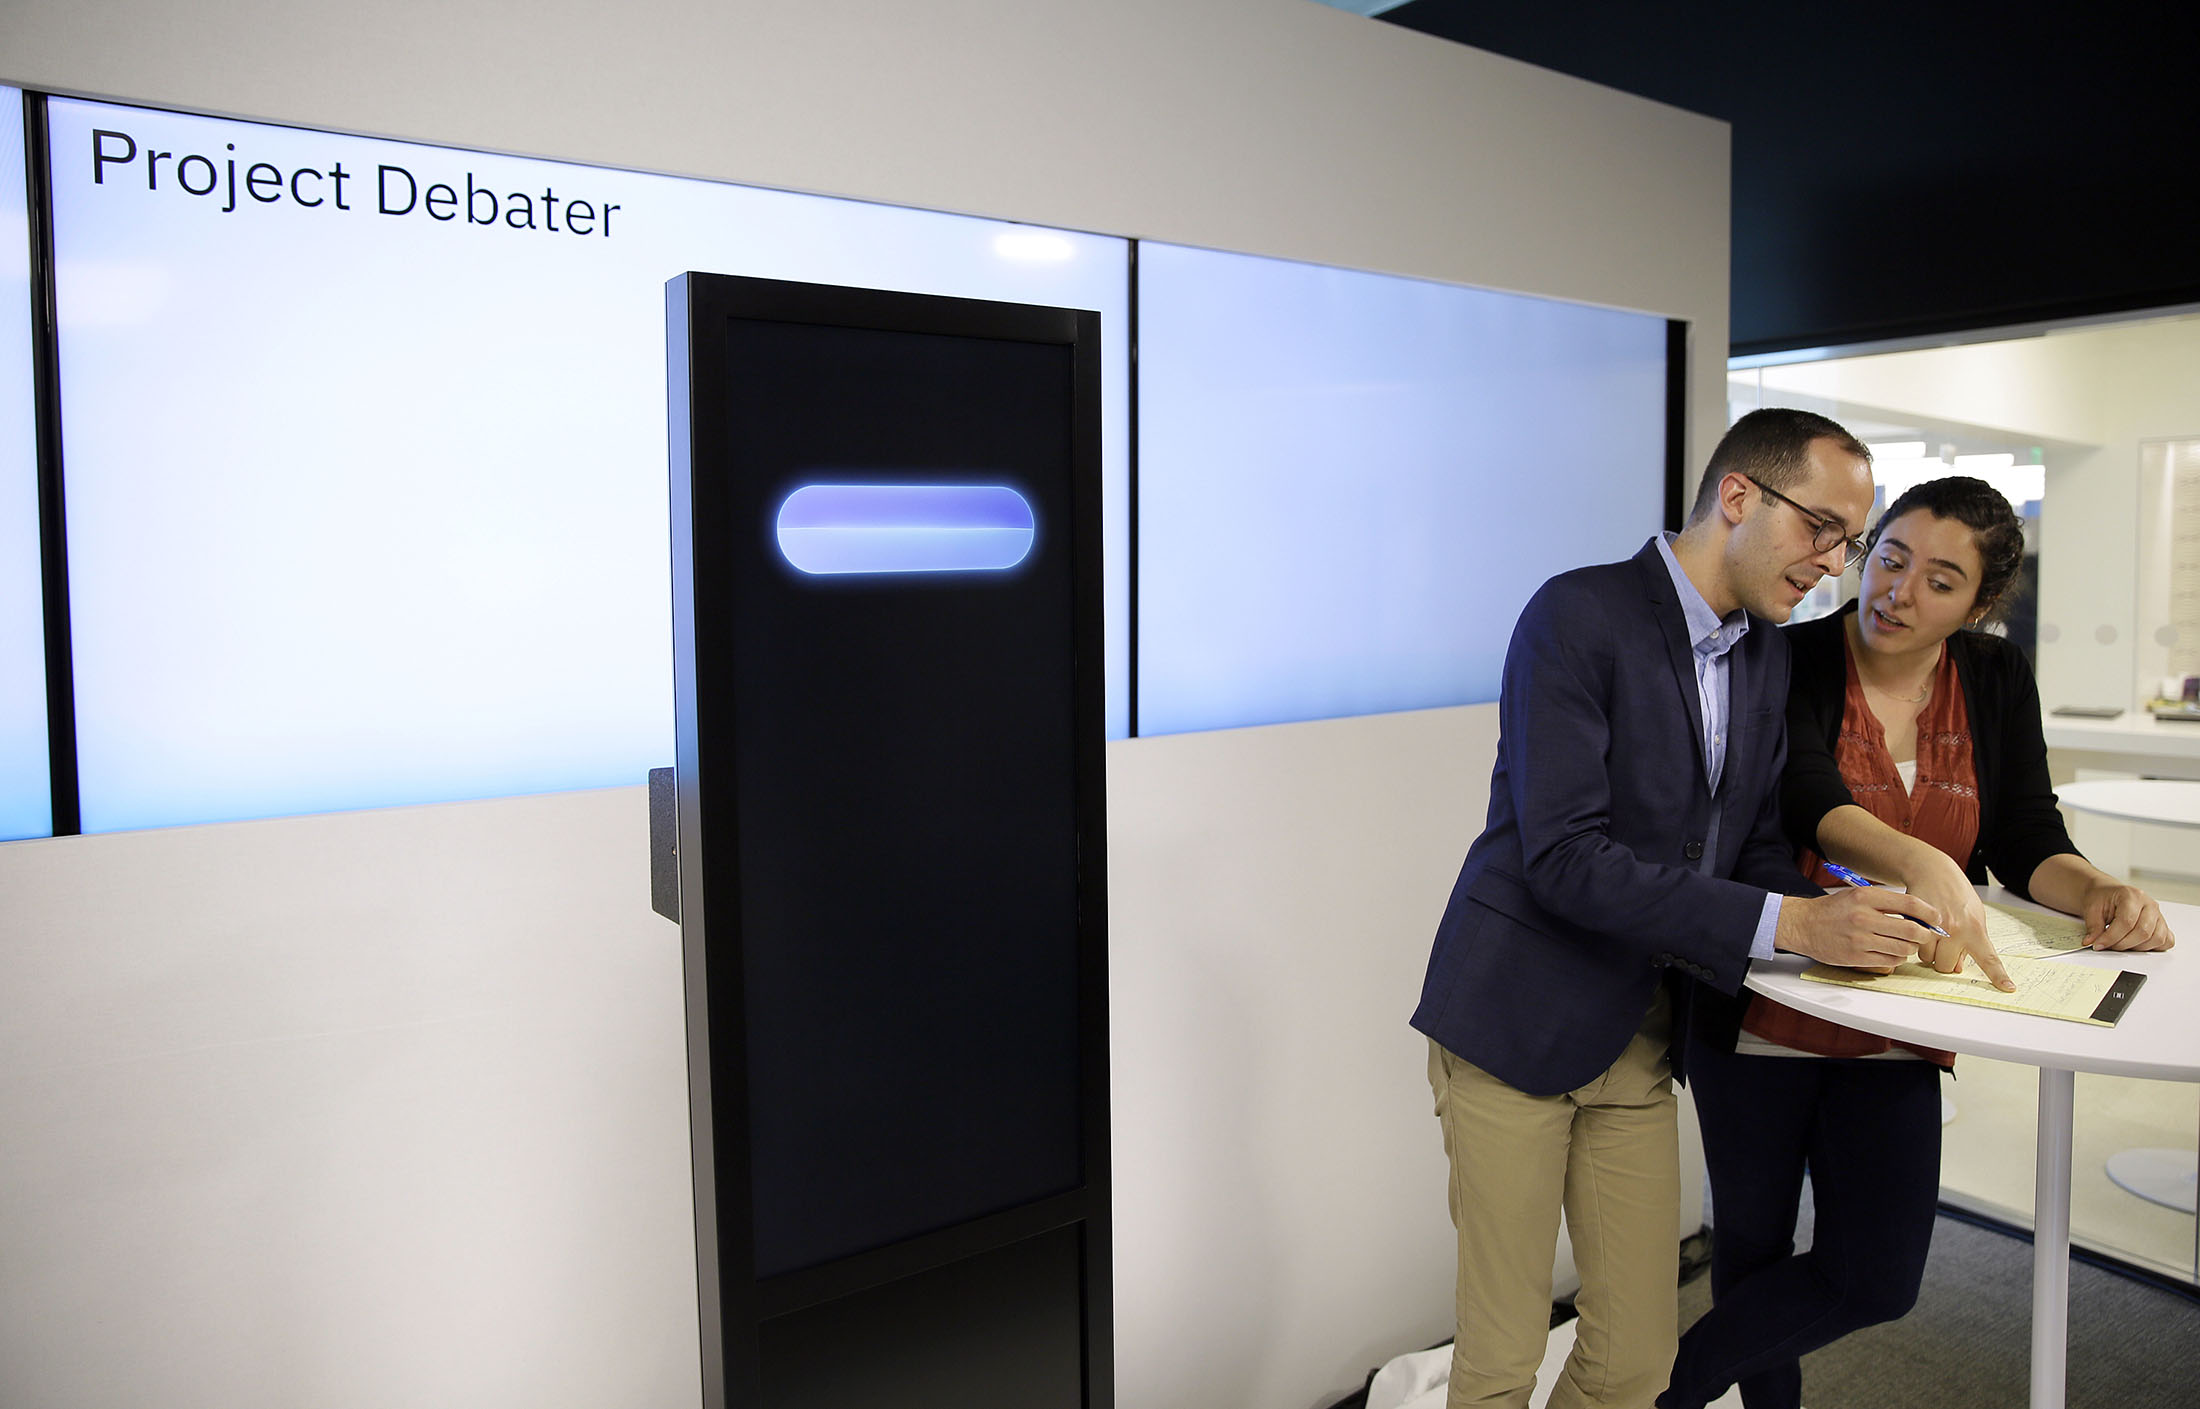 Sinceridad dulce Corte de pelo IBM's Debating AI Is Here to Convince You That You're Wrong - Bloomberg